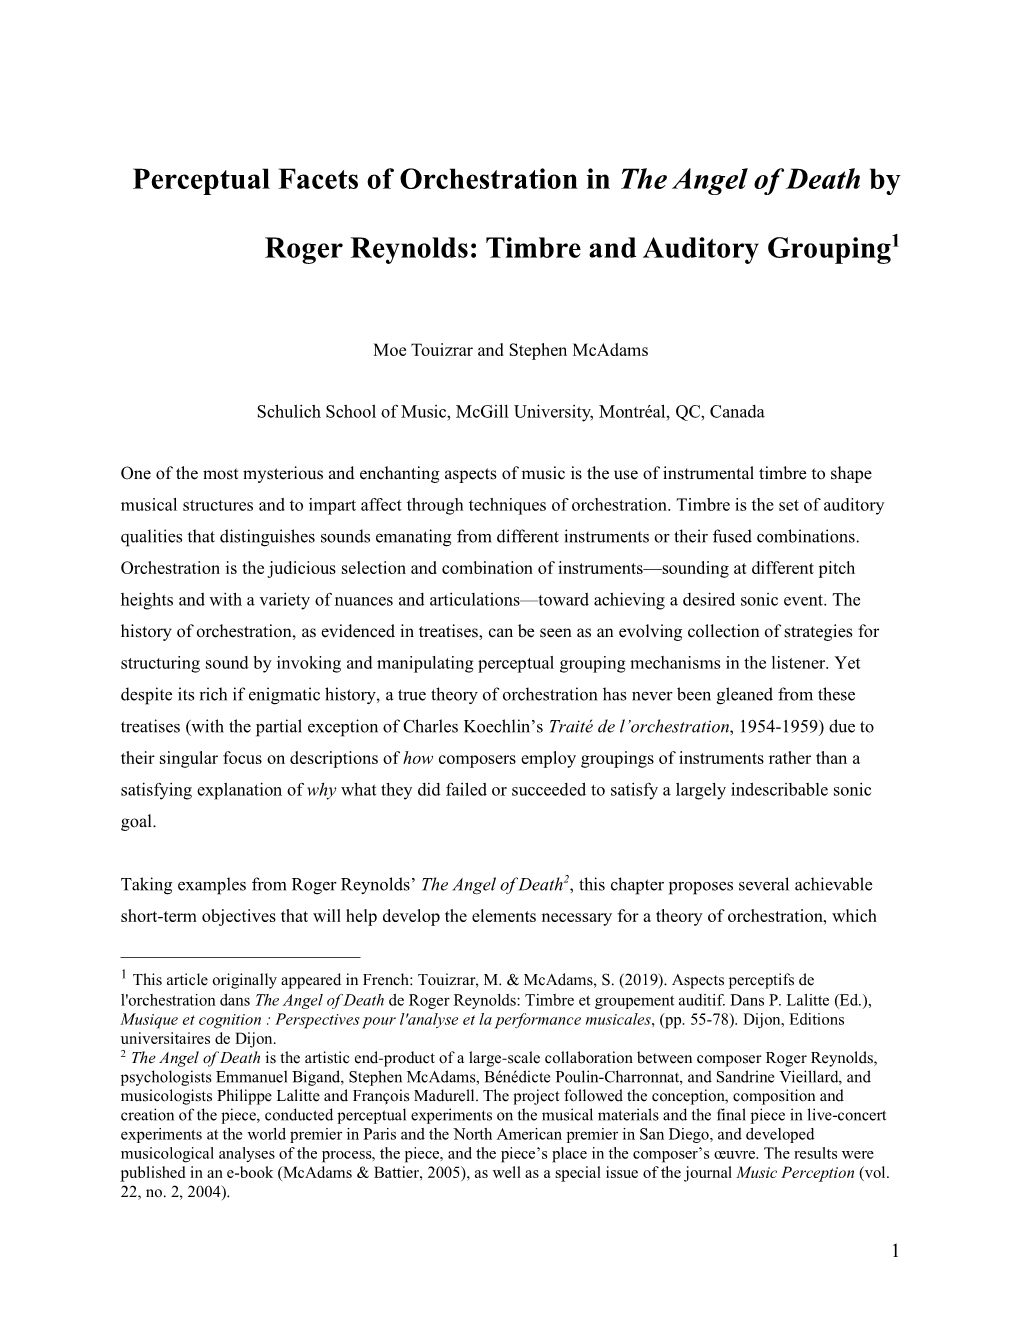 Perceptual Facets of Orchestration in the Angel of Death By